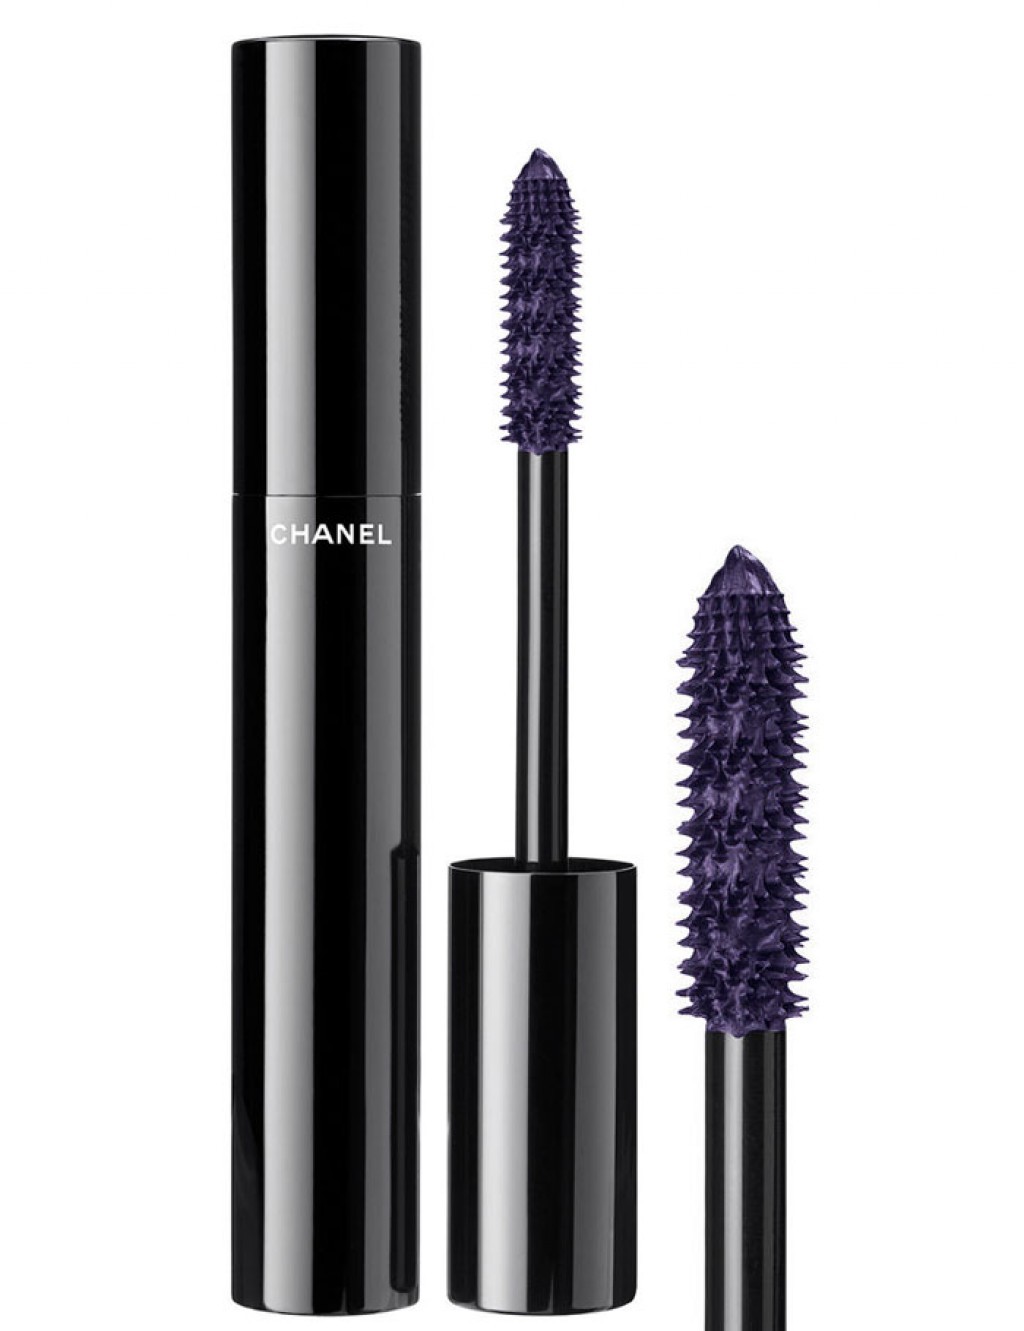 Chanel Le Volume Mascara in 40 Khaki Bronze from Fall 2013 Superstition  Collection  Color Me Loud